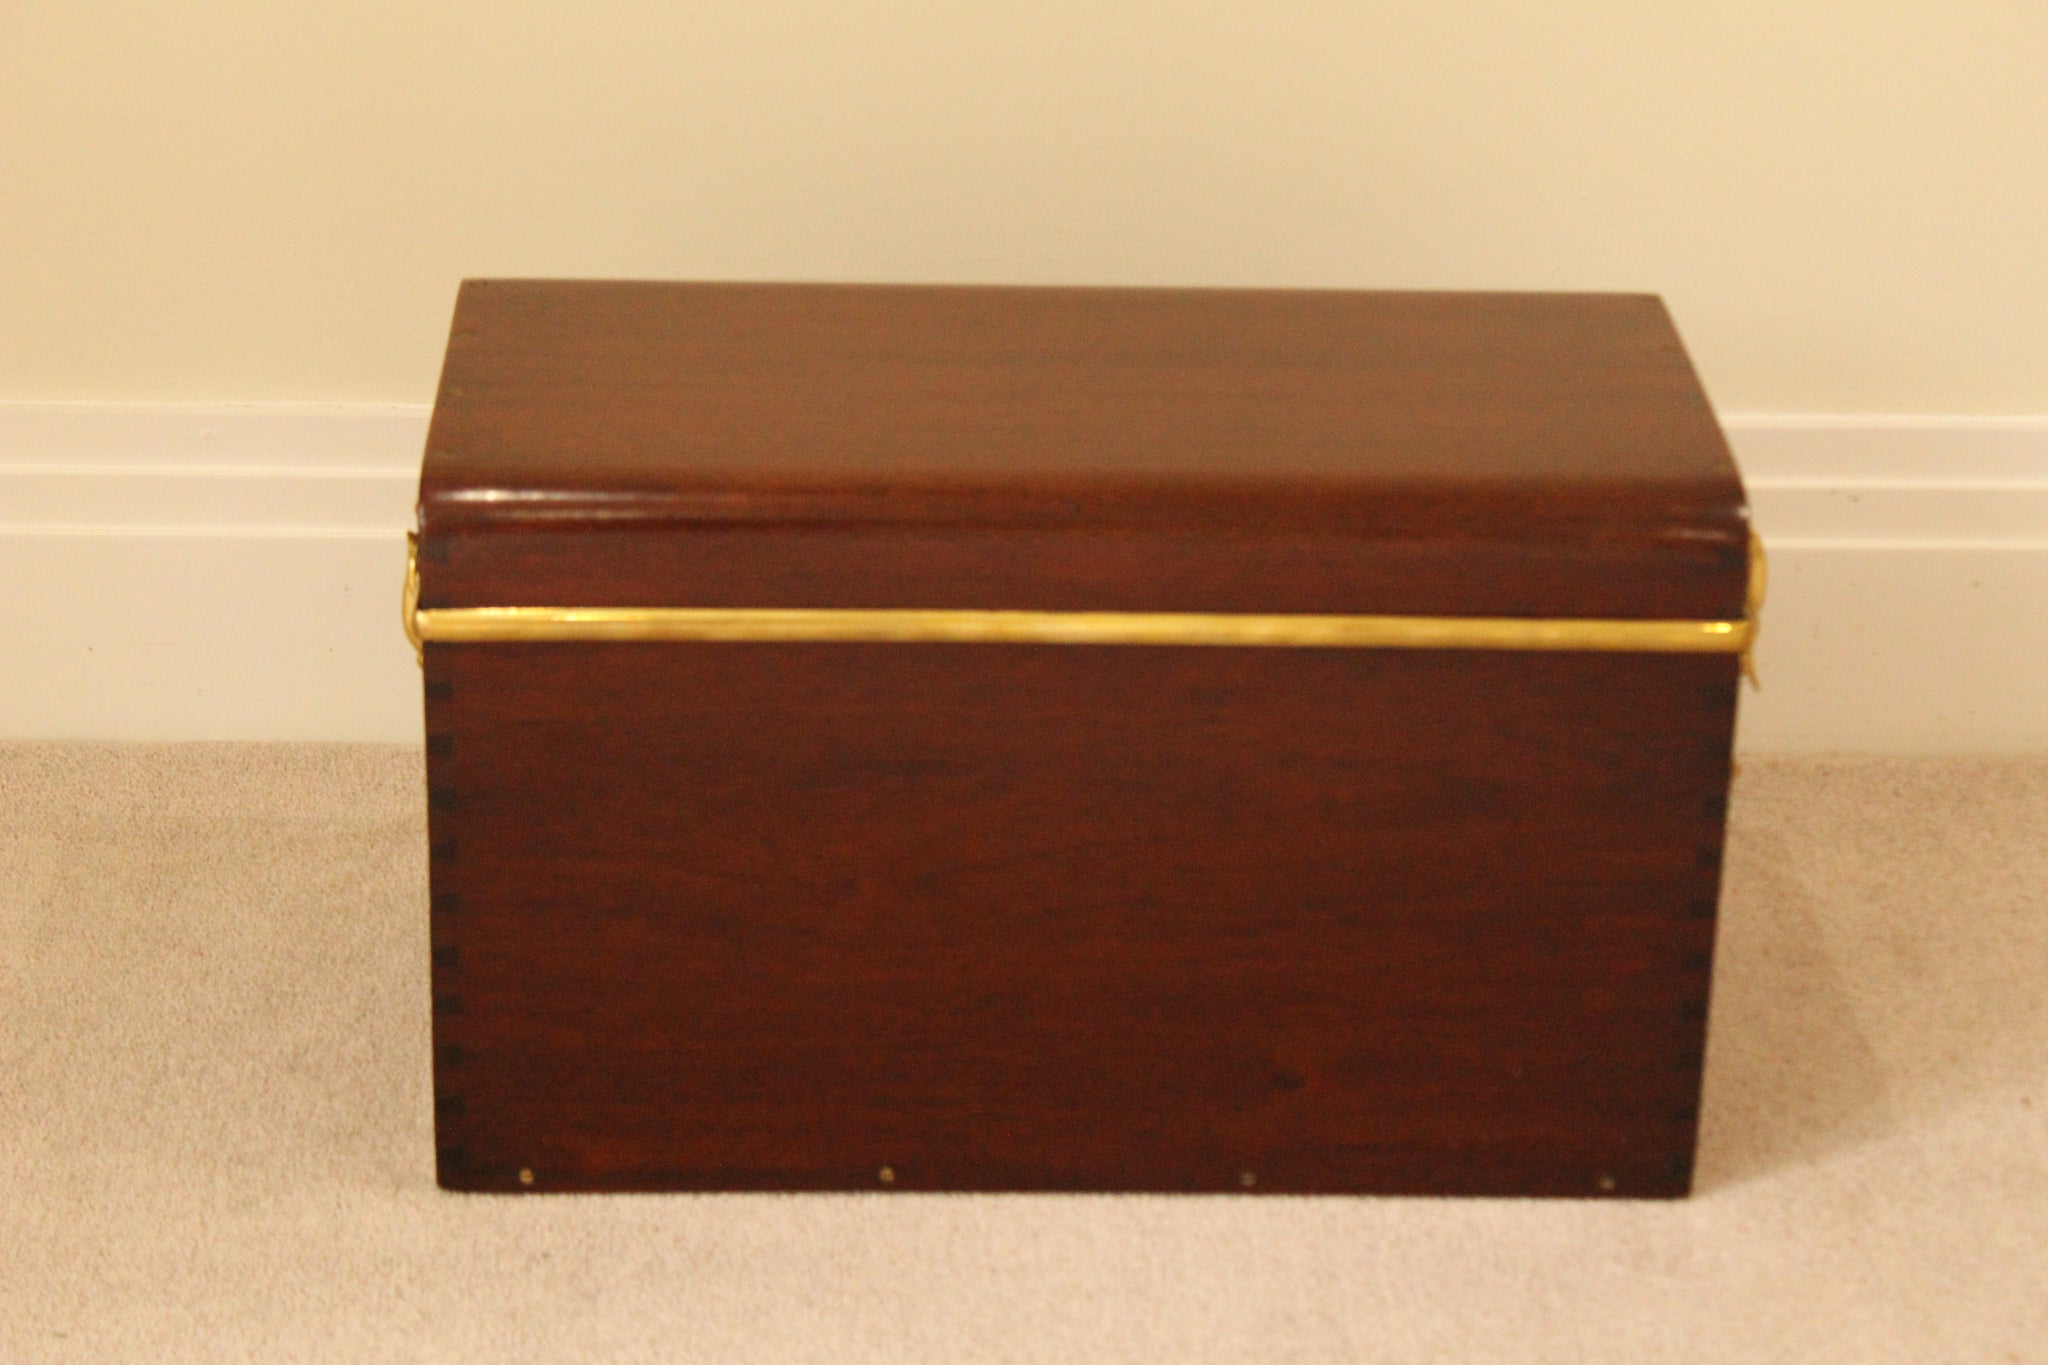 Antique Louis Vuitton toolbox in Mahagony wood - Pinth Vintage Luggage